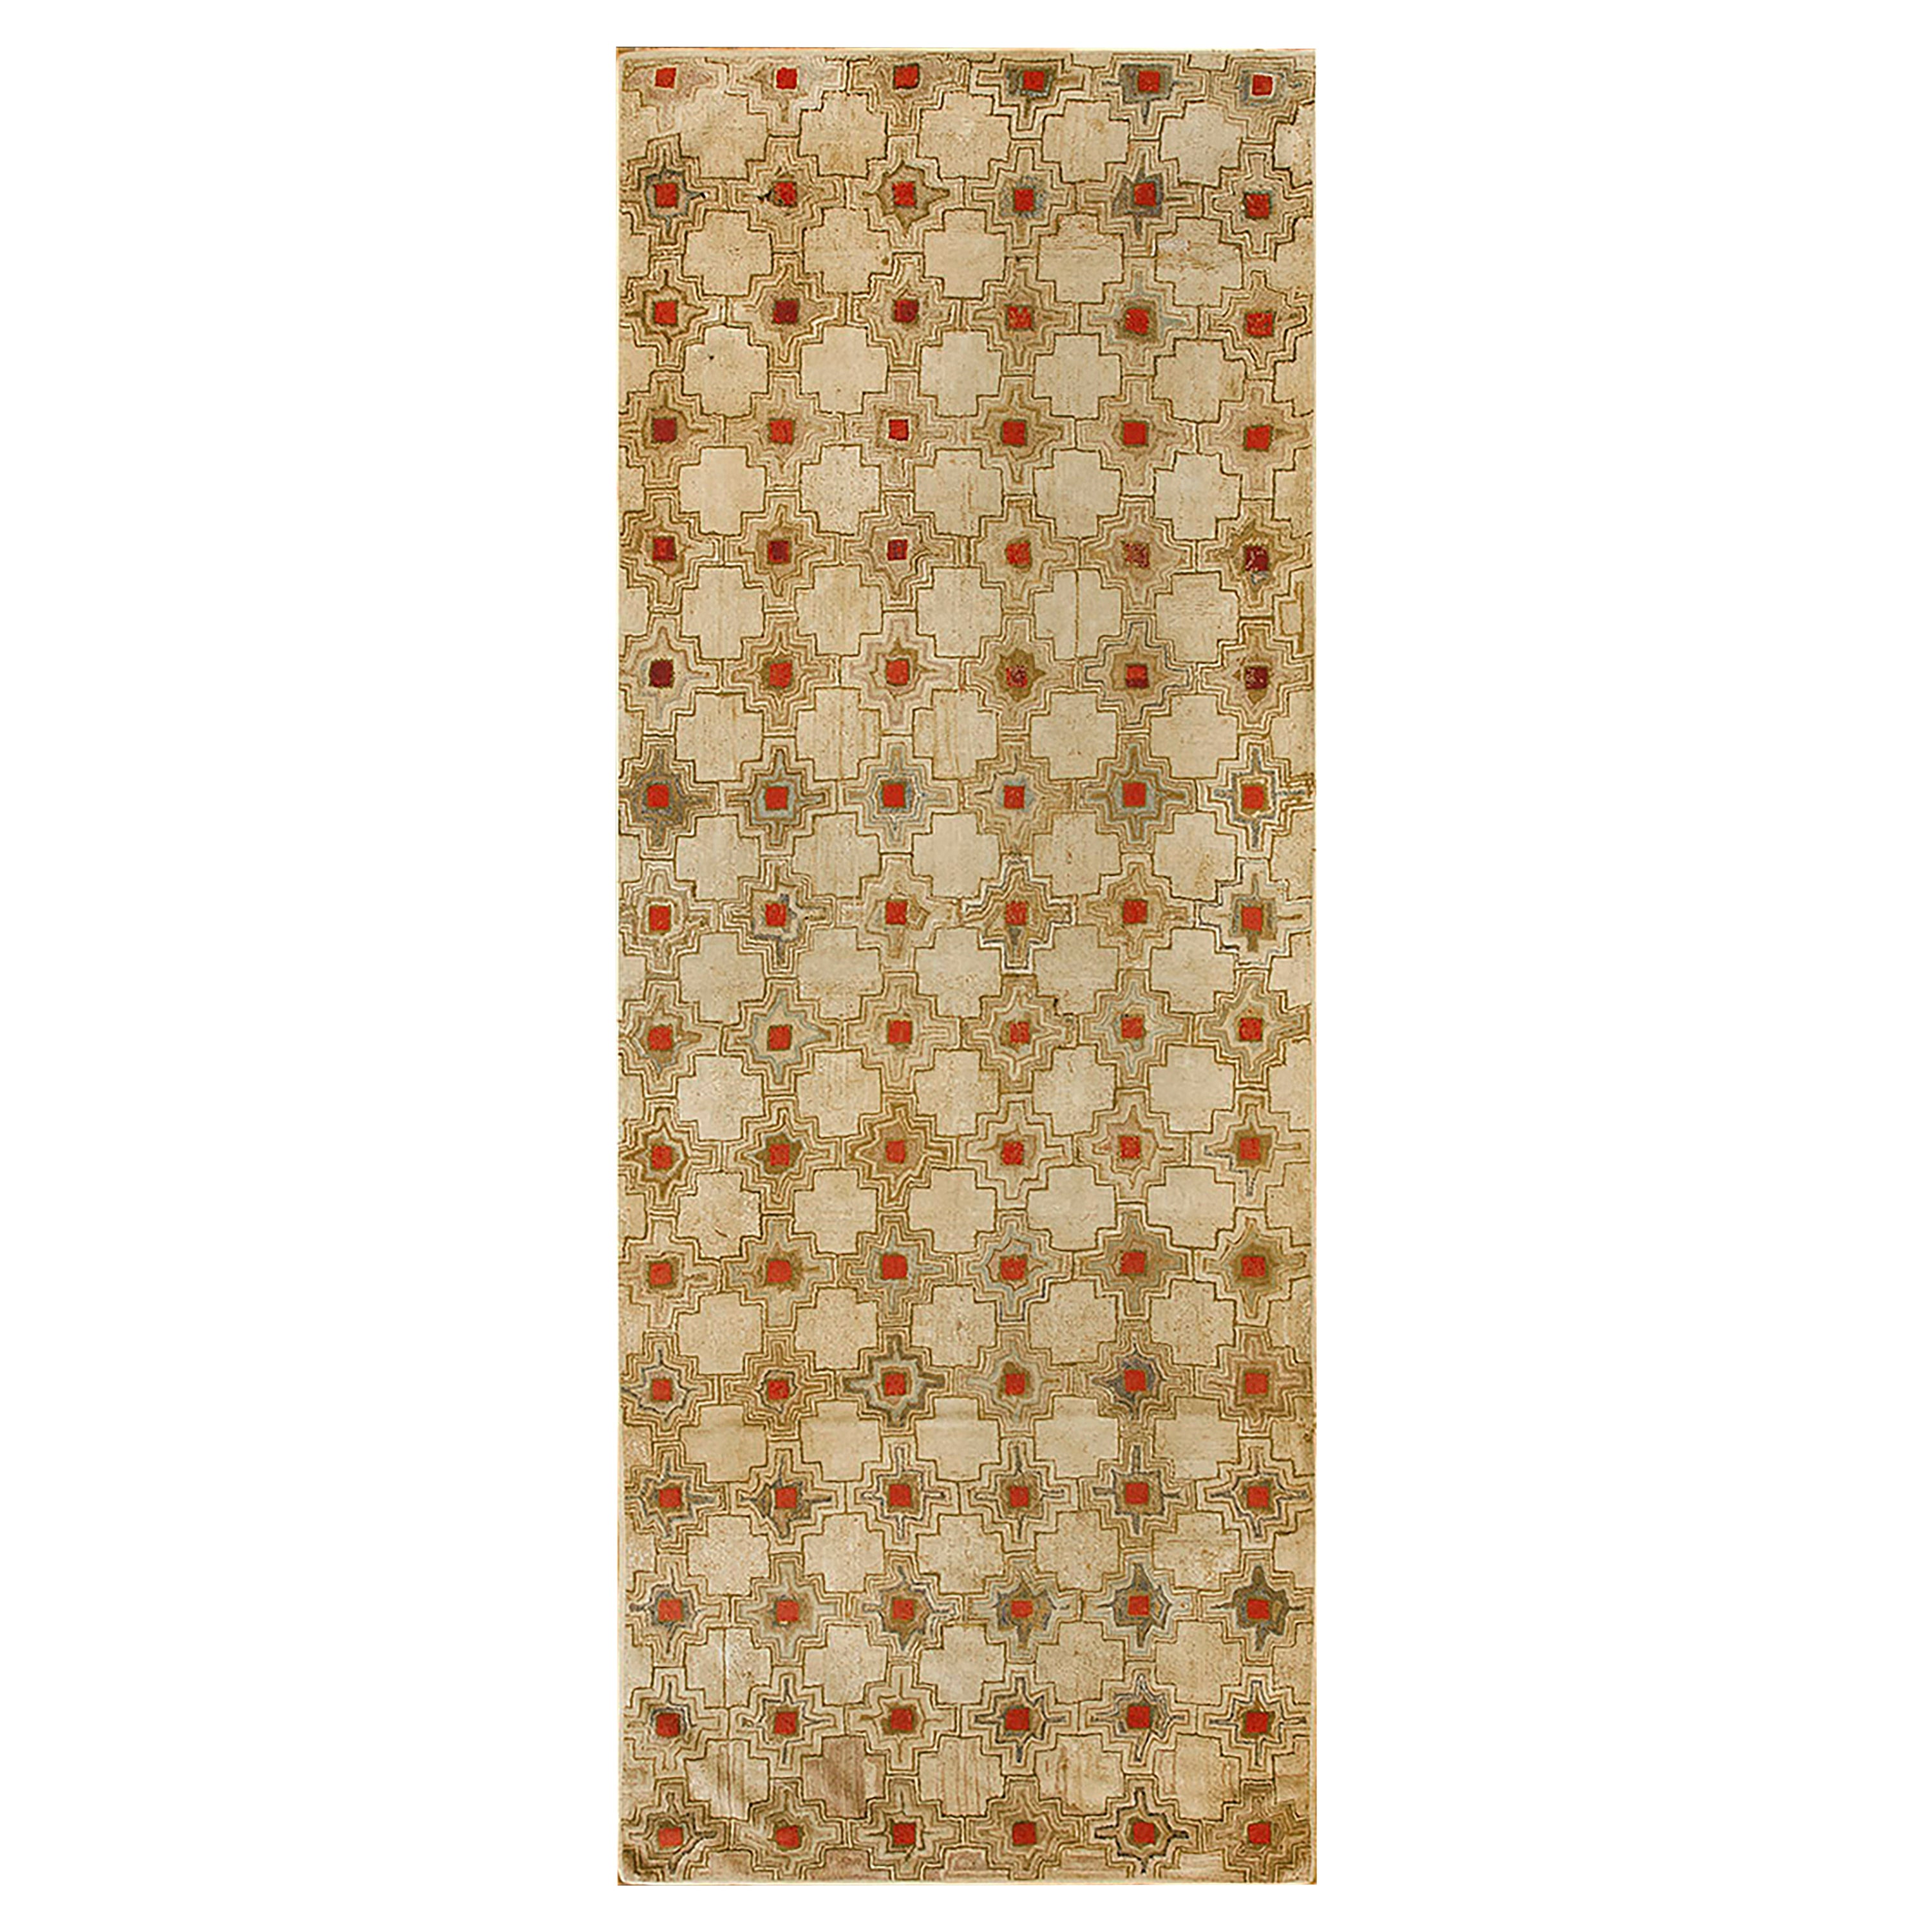 Antique American Hooked Rug  (4' x 10' 10" - 122 x 330 cm) For Sale